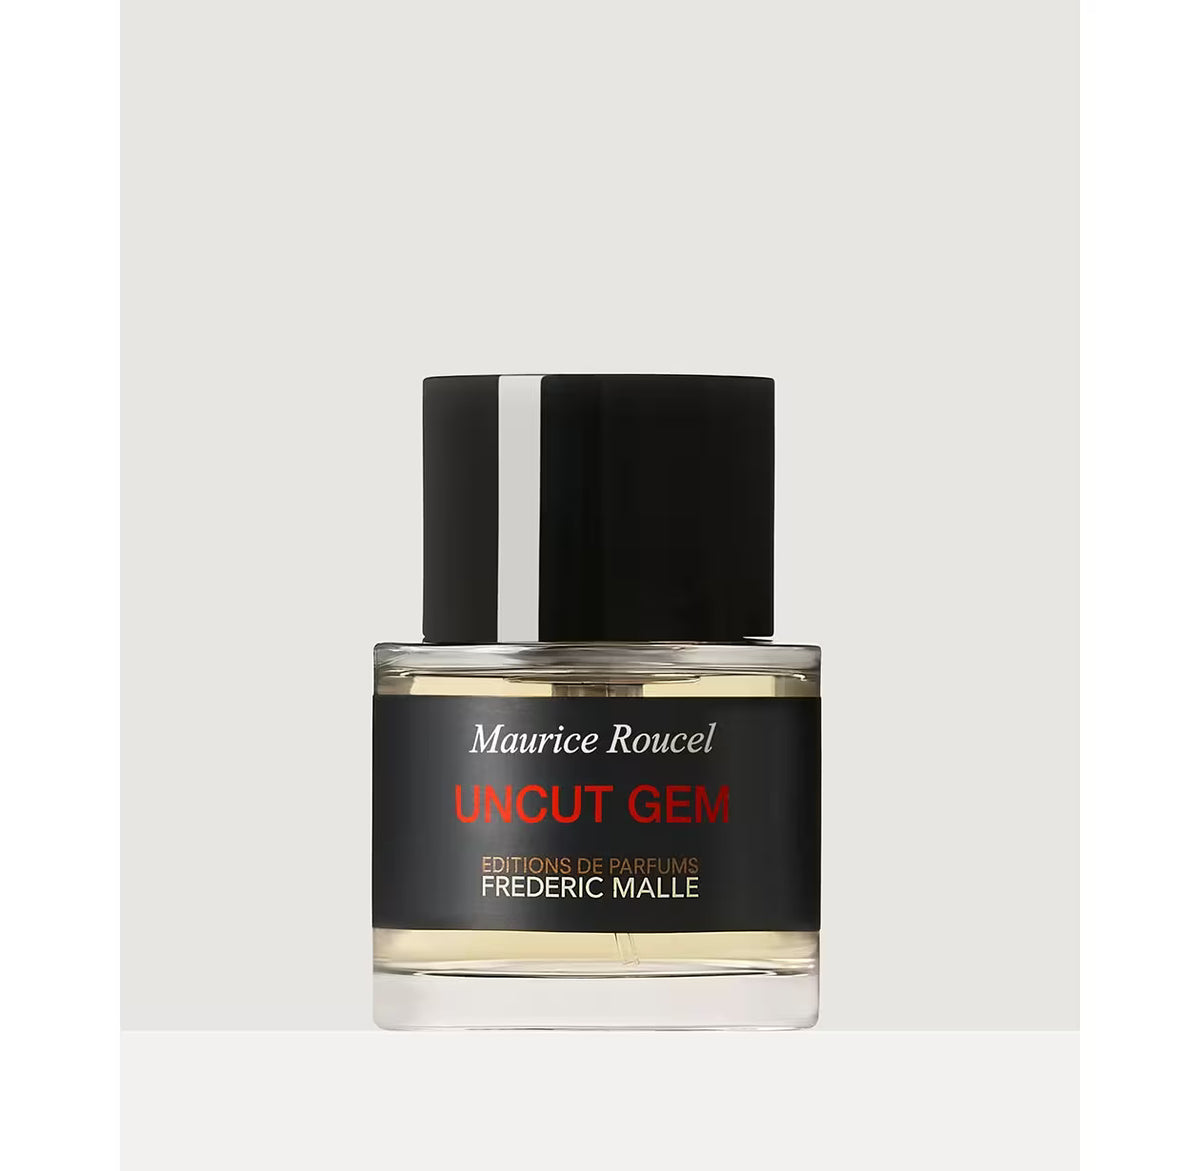 Frederic Malle Uncut Gem by Maurice Roucel